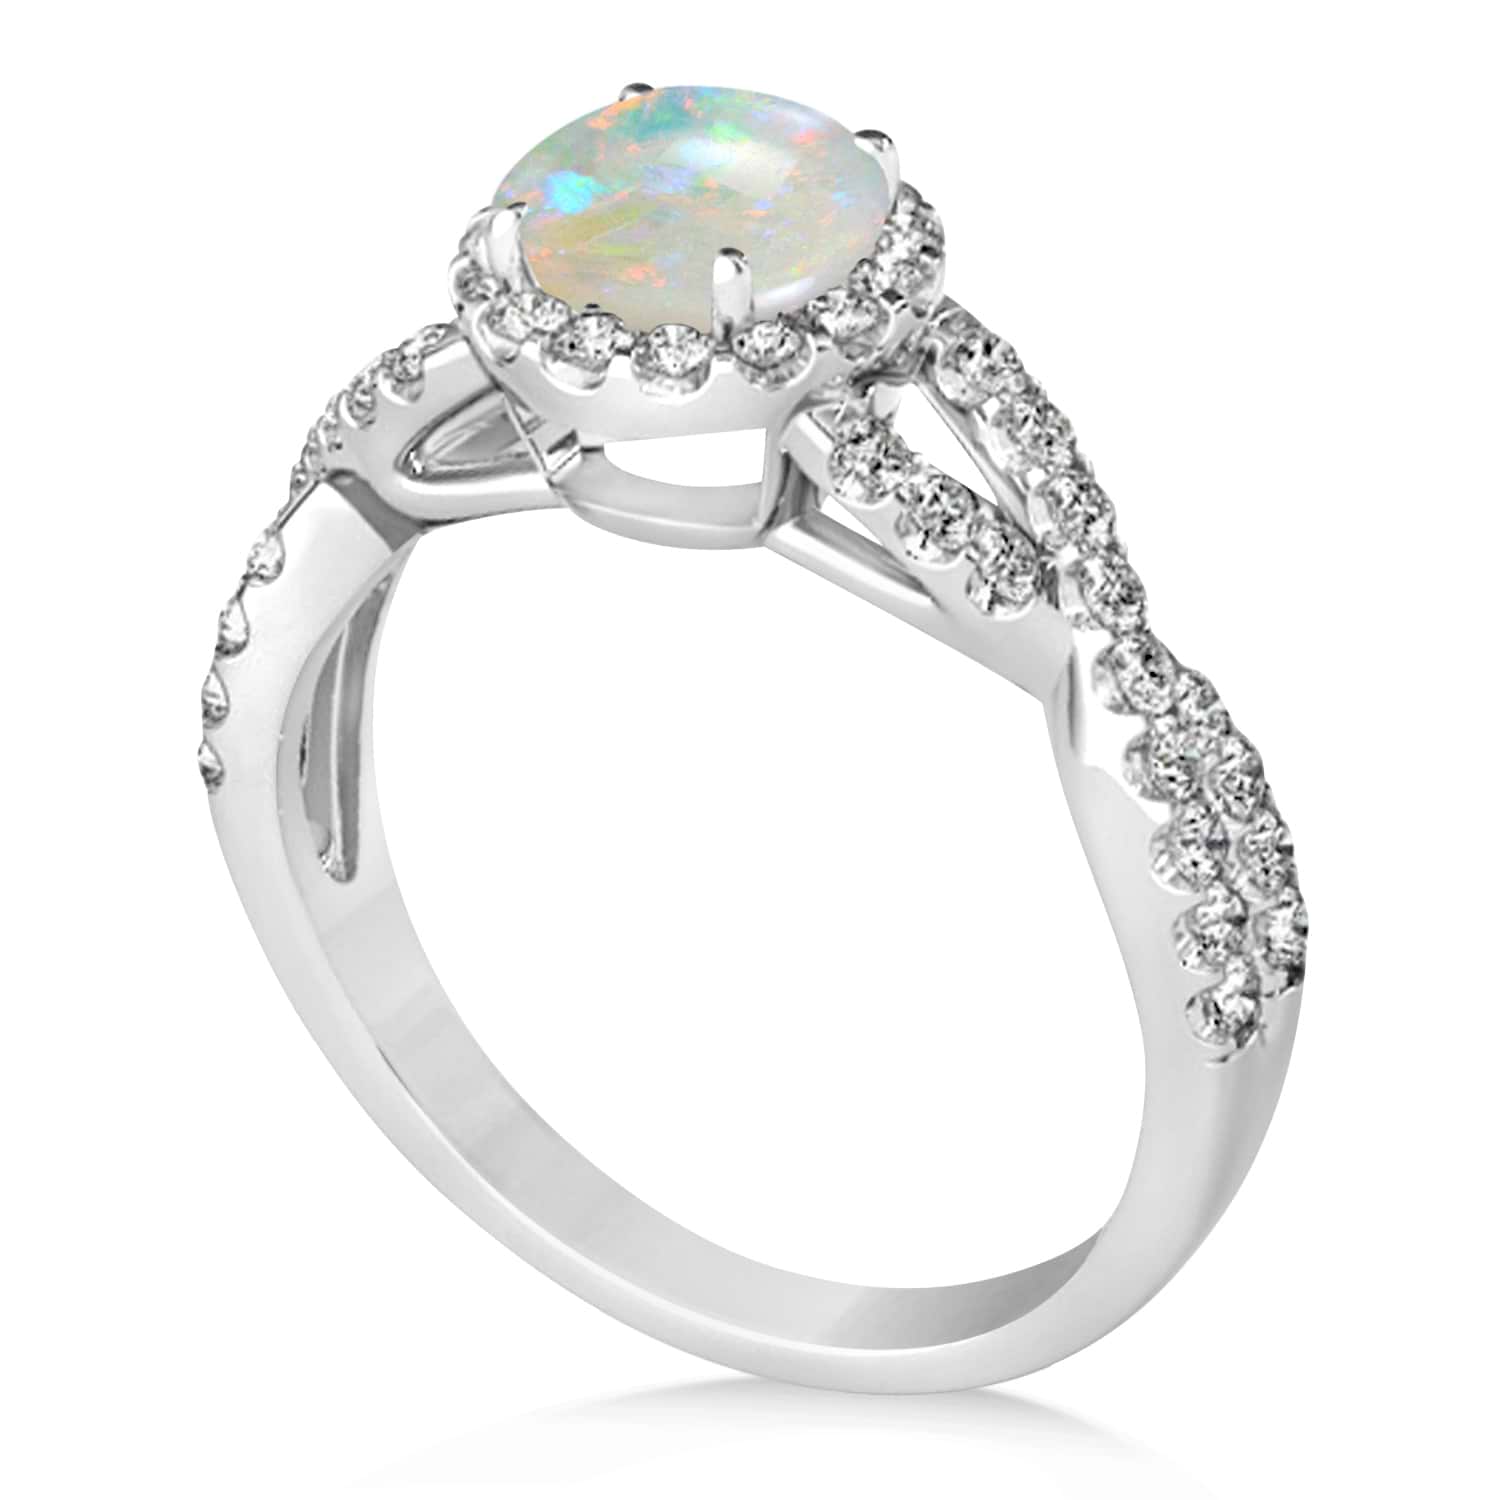 Opal & Diamond Twisted Engagement Ring 14k White Gold 1.07ct - NG5536